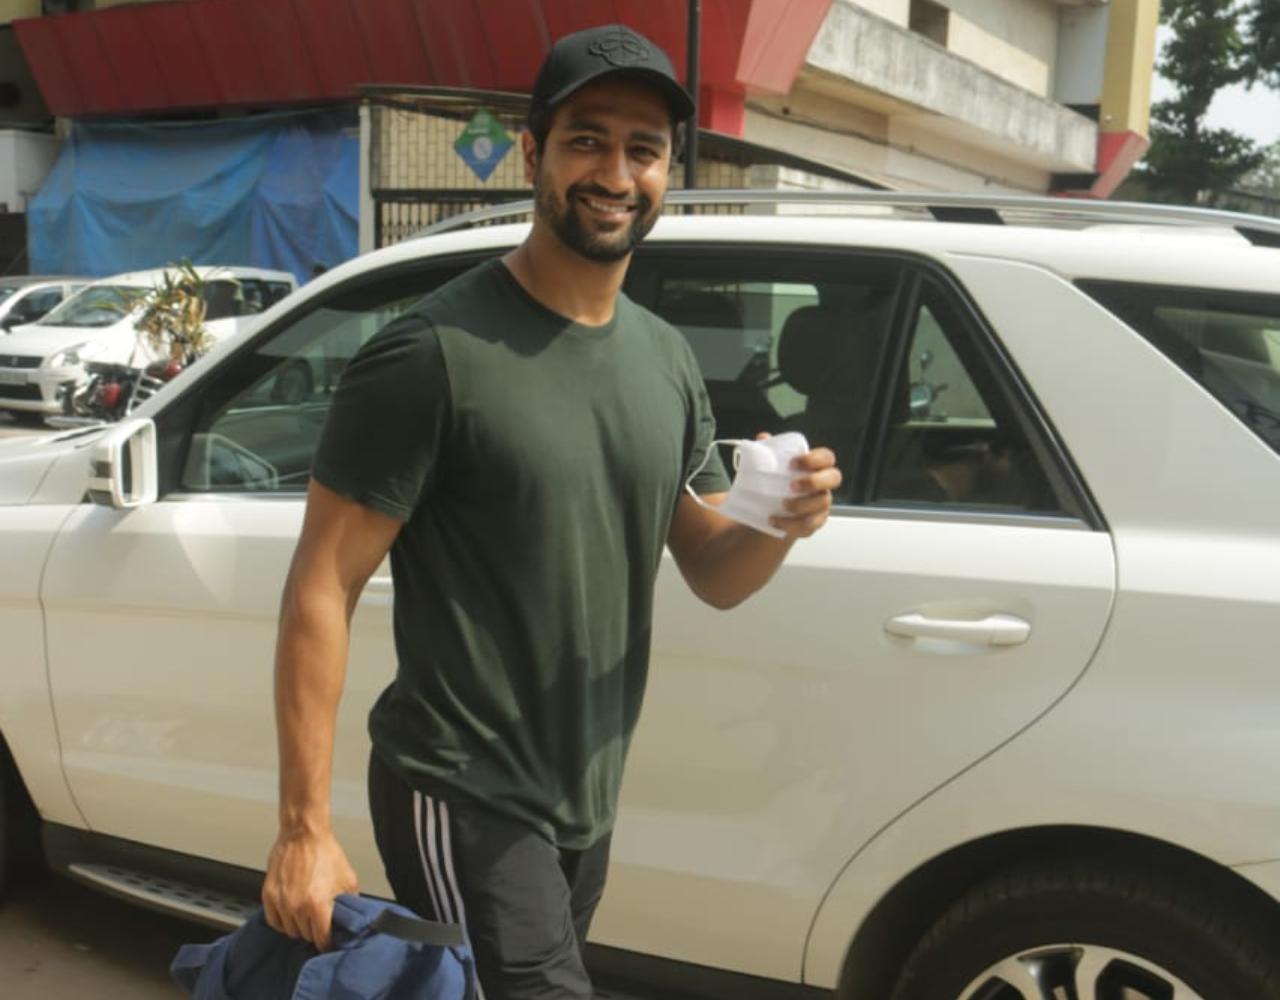 Vicky Kaushal was clicked outside his gym in Bandra. The actor opted for a green t-shirt and black pants for the outing.